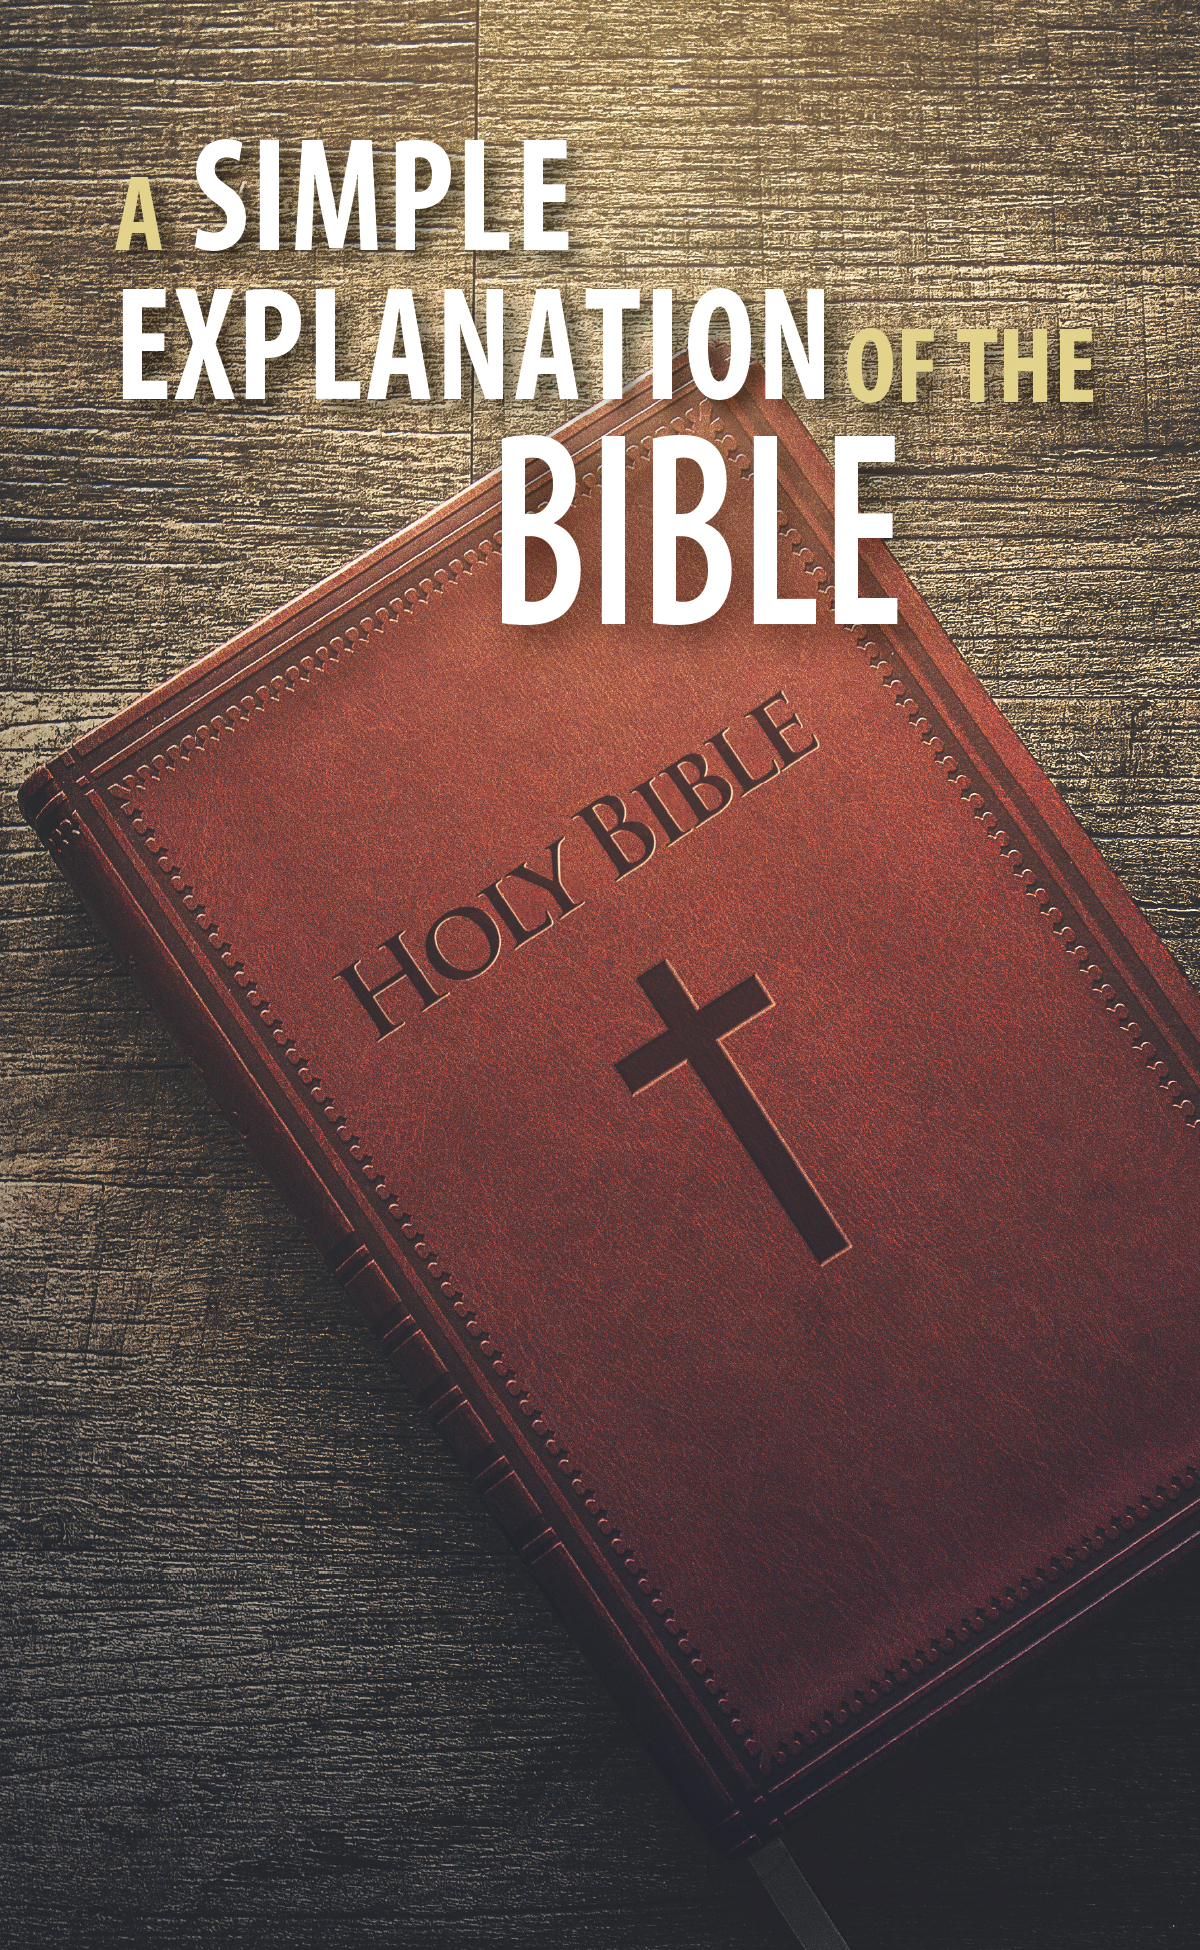 A Simple Explanation of the Bible